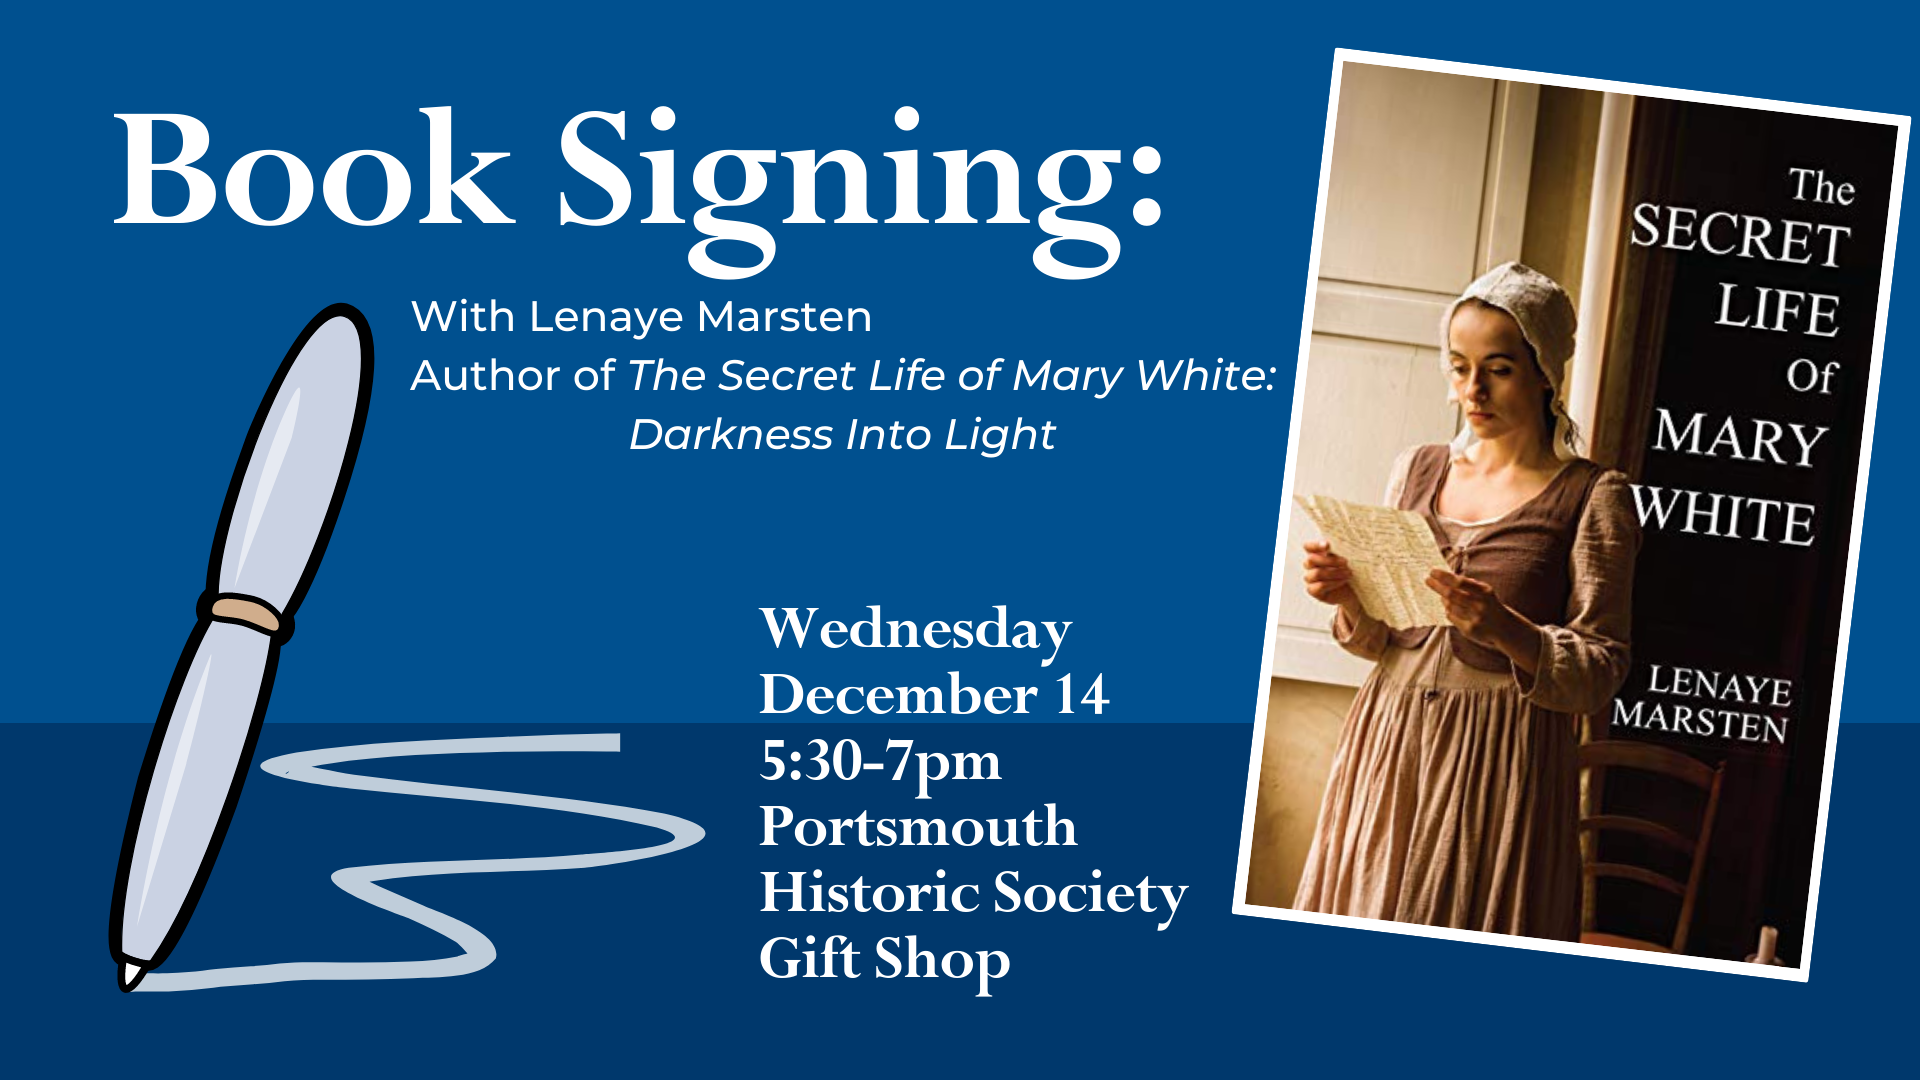 Book Signing with With Lenaye Marsten Author of The Secret Life of Mary White: Darkness Into Light on Wednesday, December 14 at 5:30pm